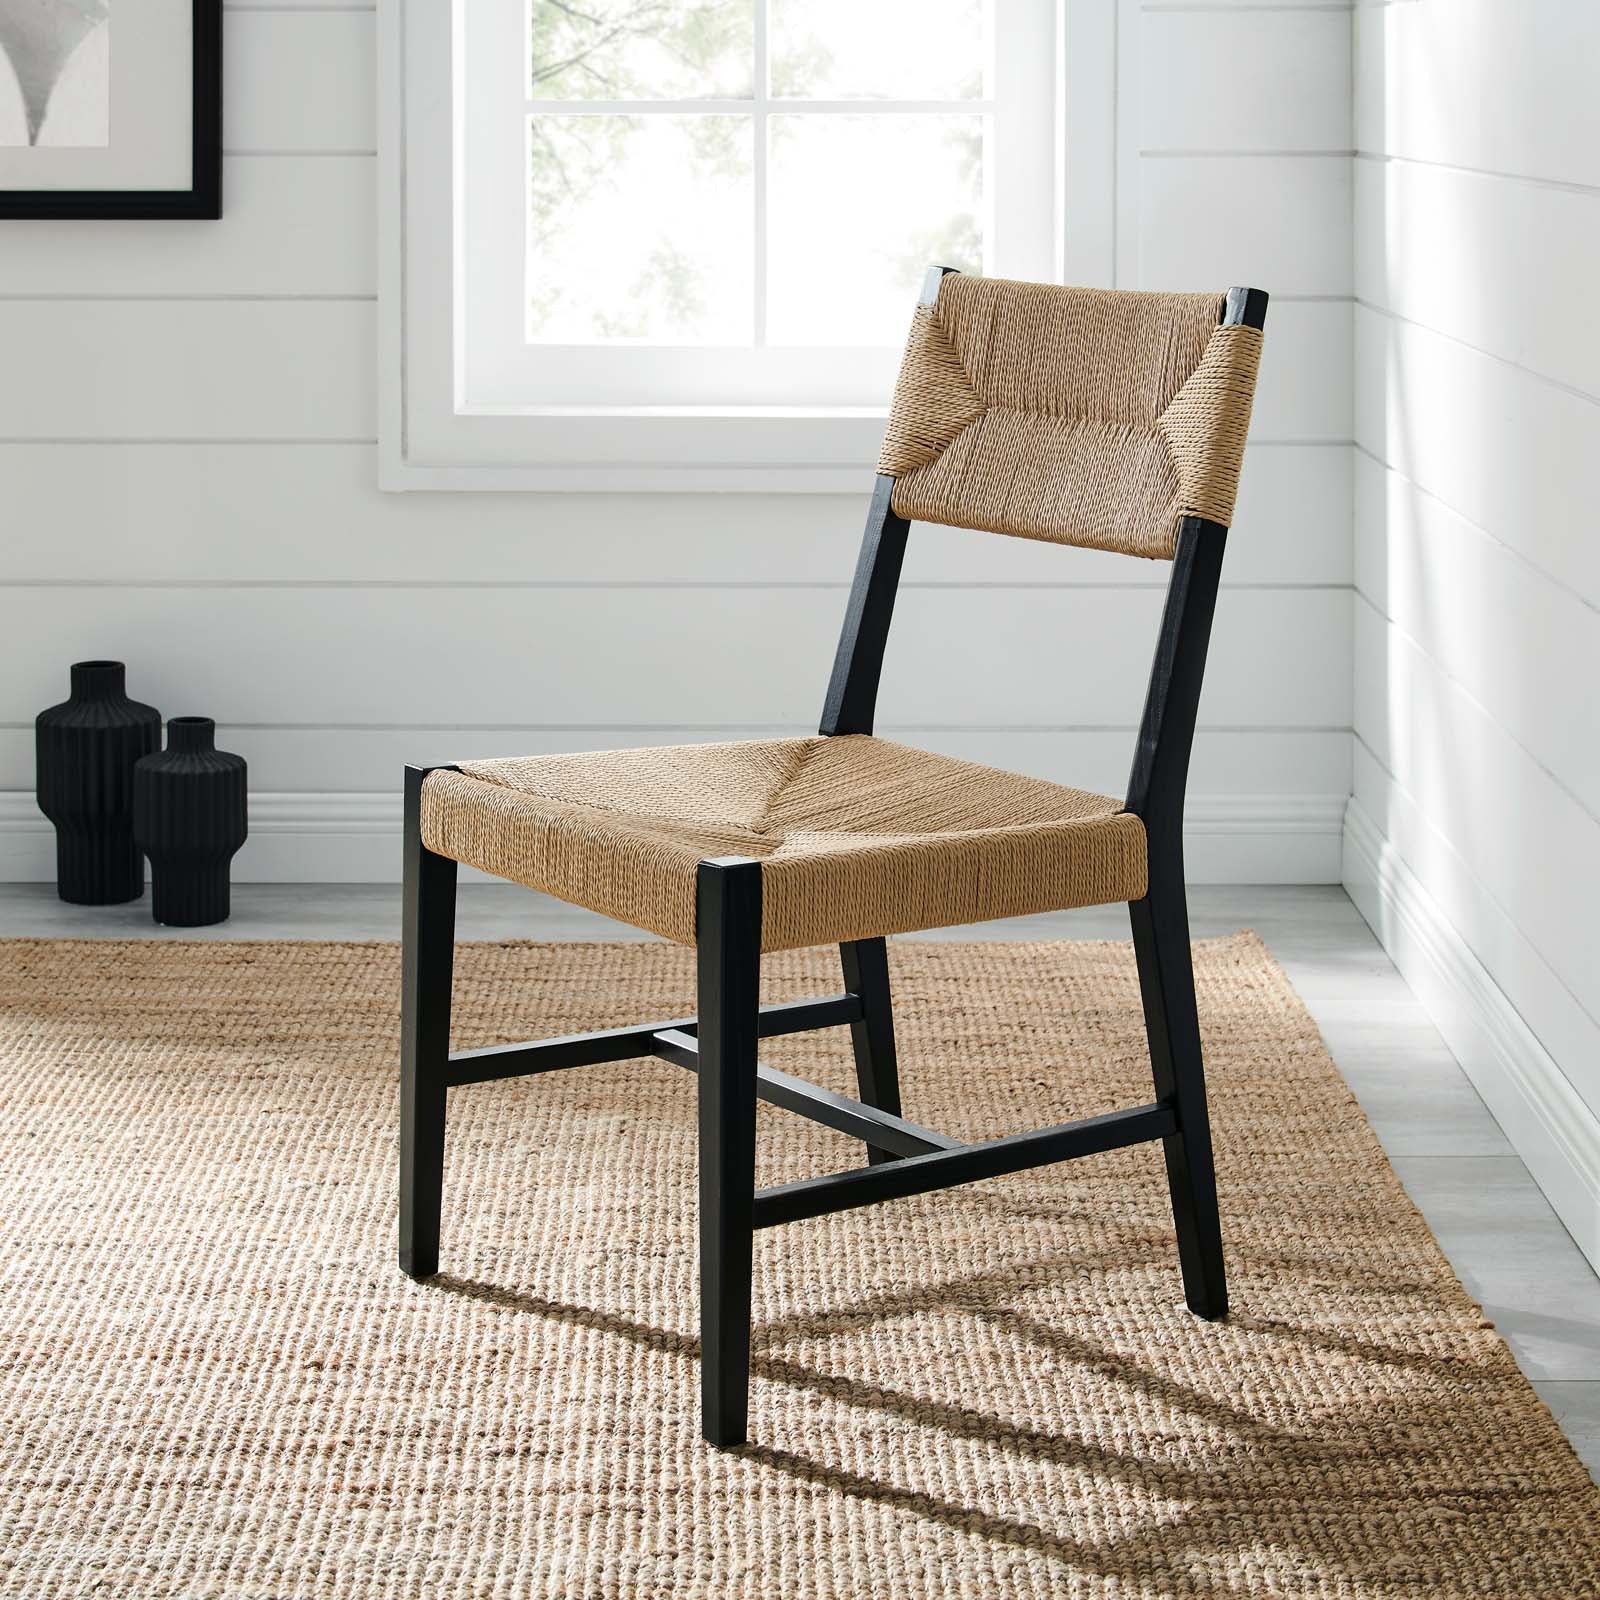 Bodie Wood Dining Chair - East Shore Modern Home Furnishings